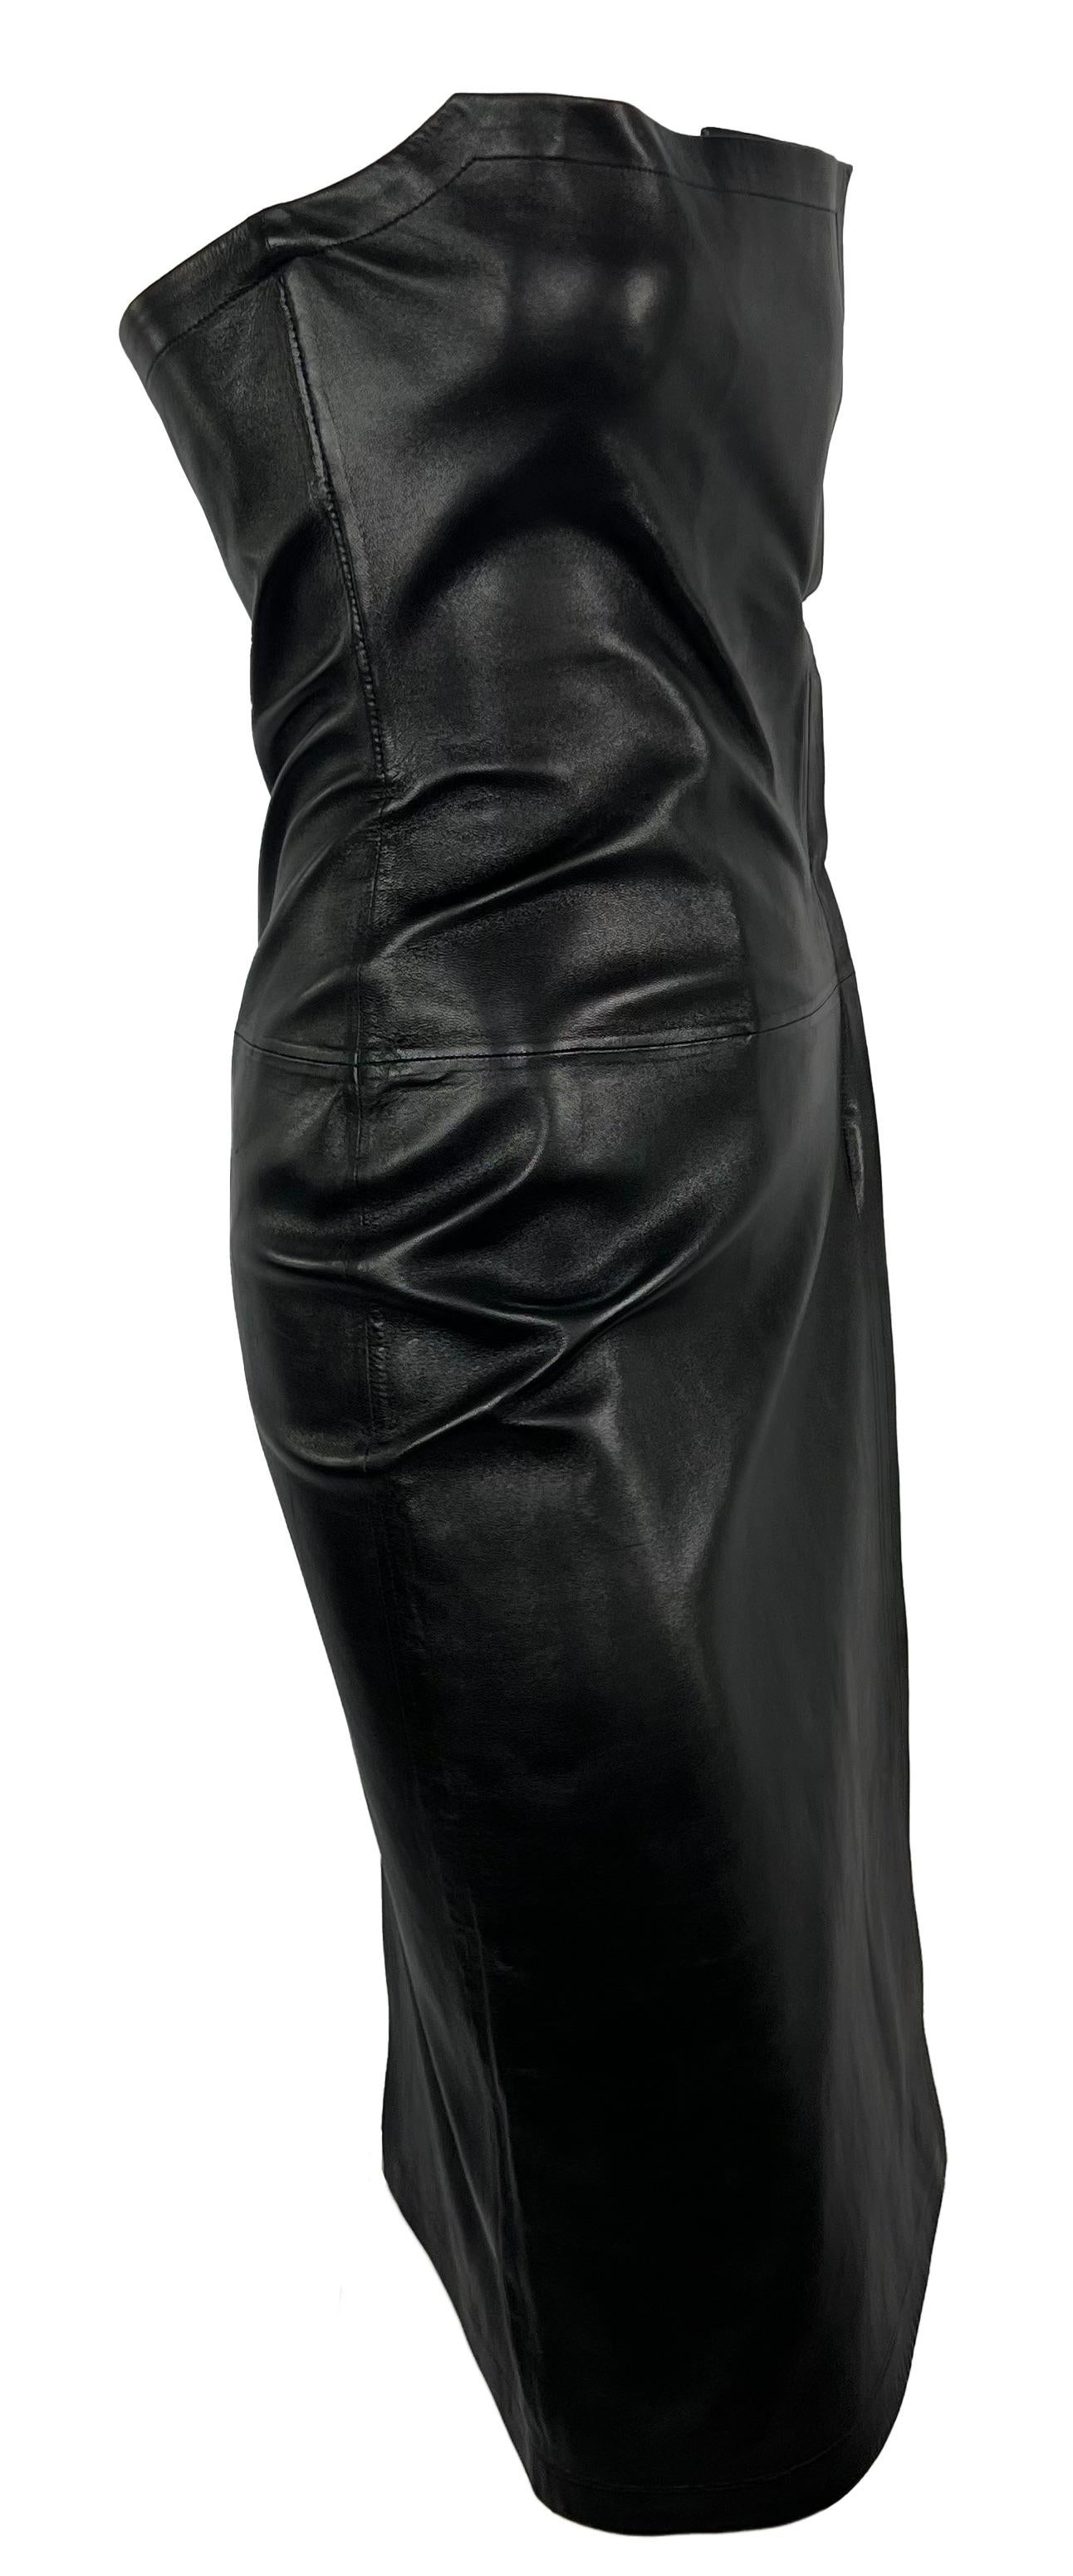 S/S 2001 Yves Saint Laurent by Tom Ford Black Leather Strapless Bandage Dress For Sale 2